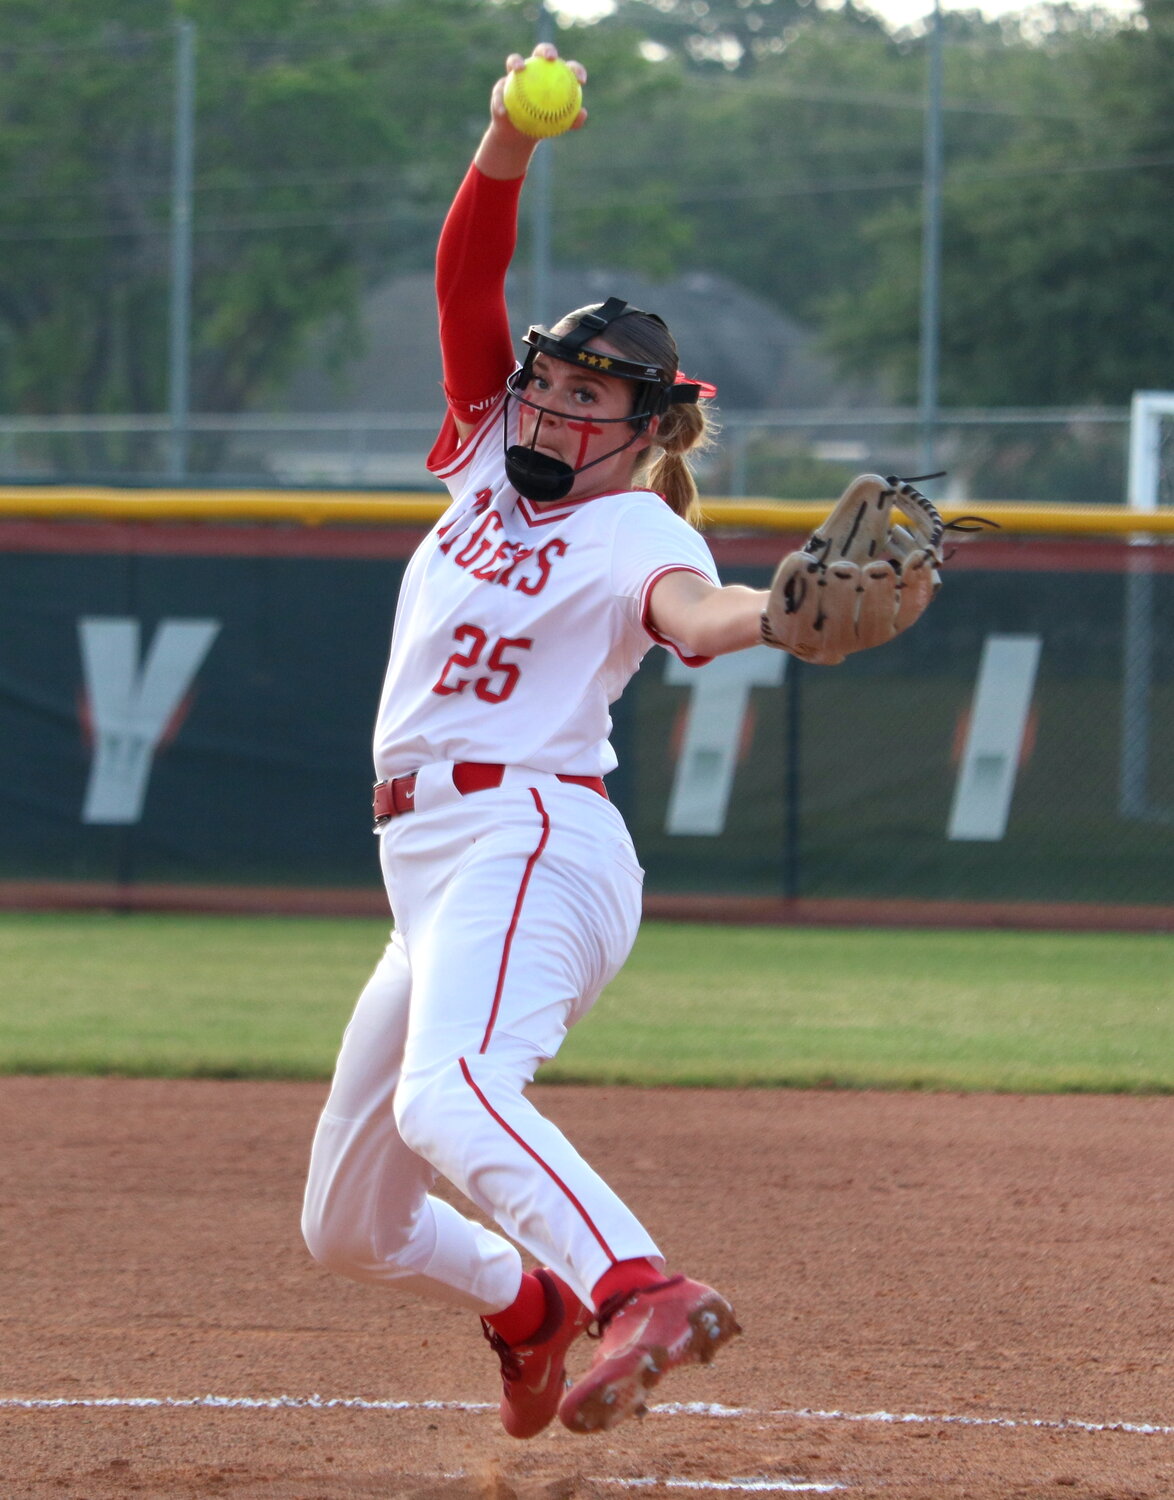 Cameryn Harrison pitches during Thursday’s Area Round game between Katy and Bellaire at the Katy softball field.